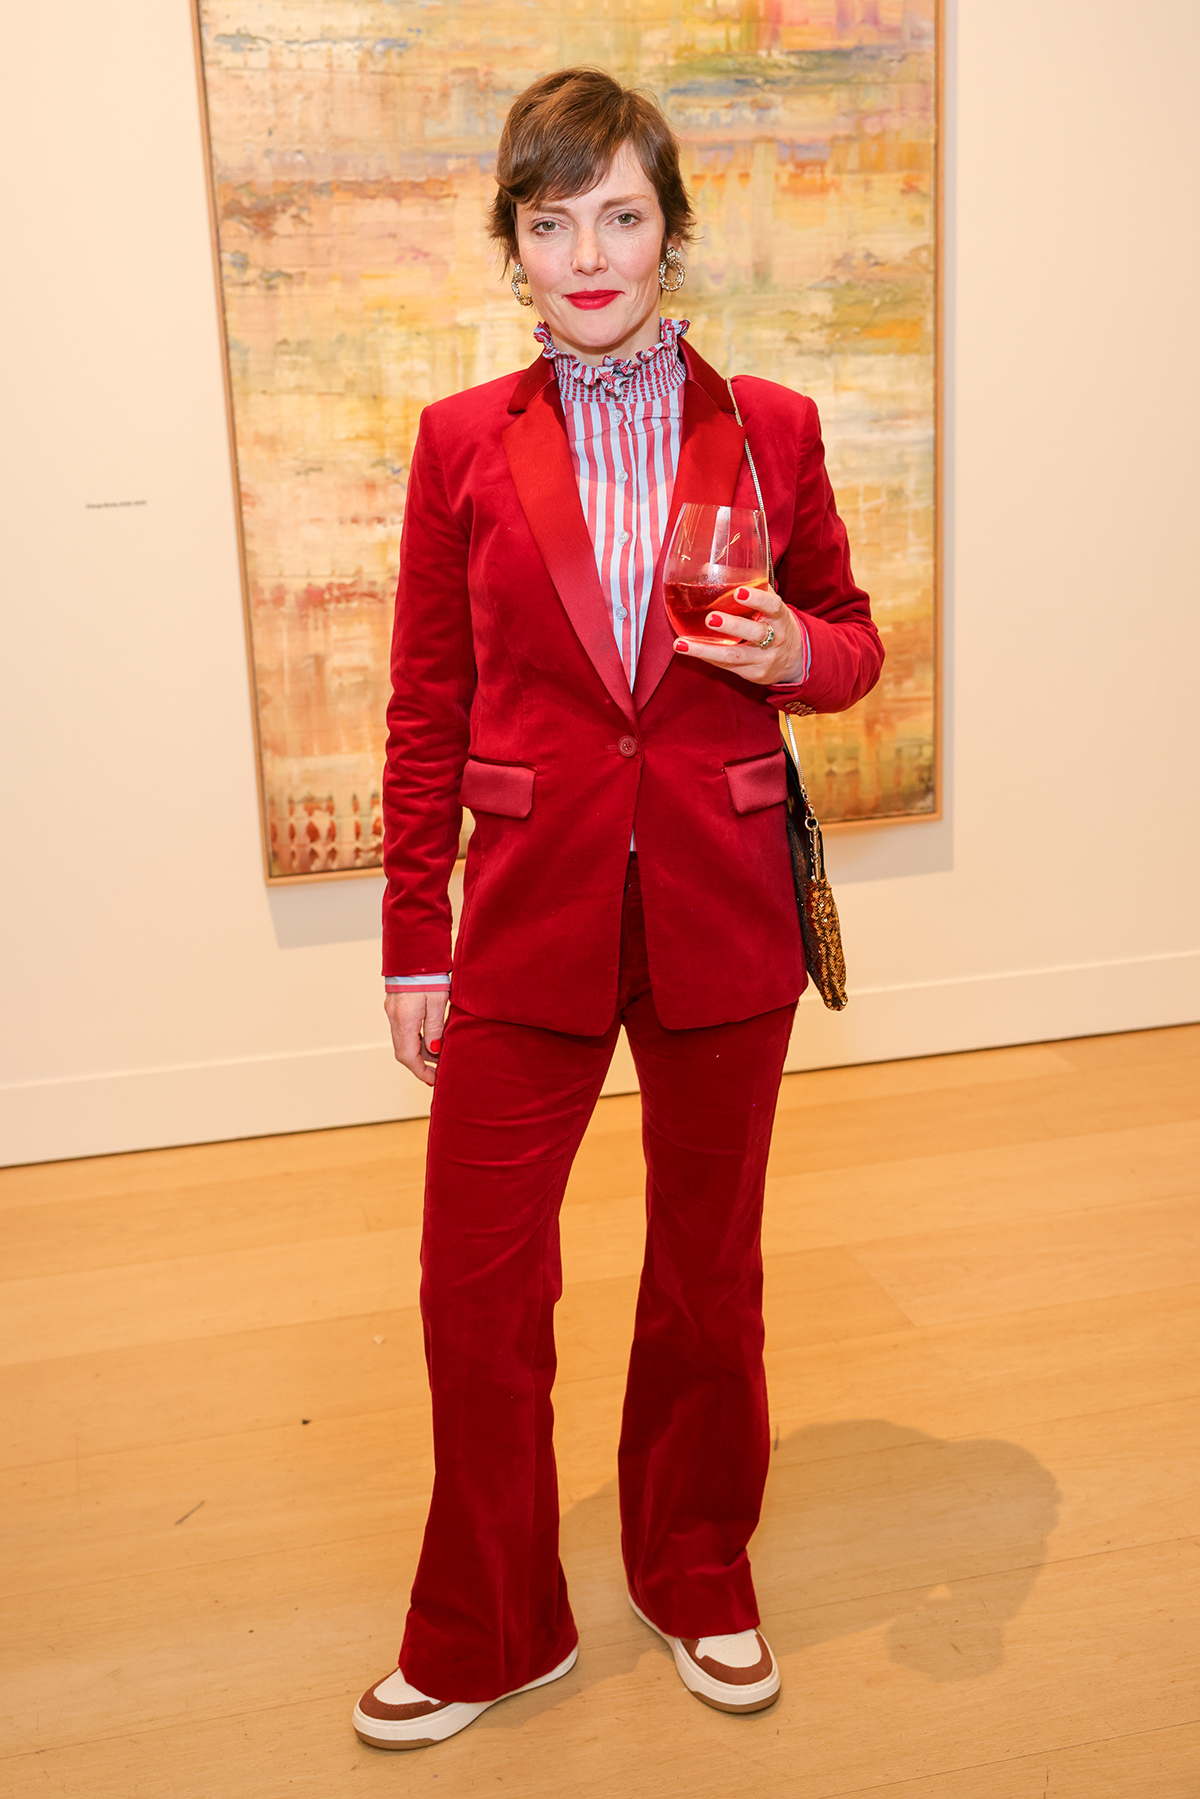 A woman wearing a red suit holding a wine glass